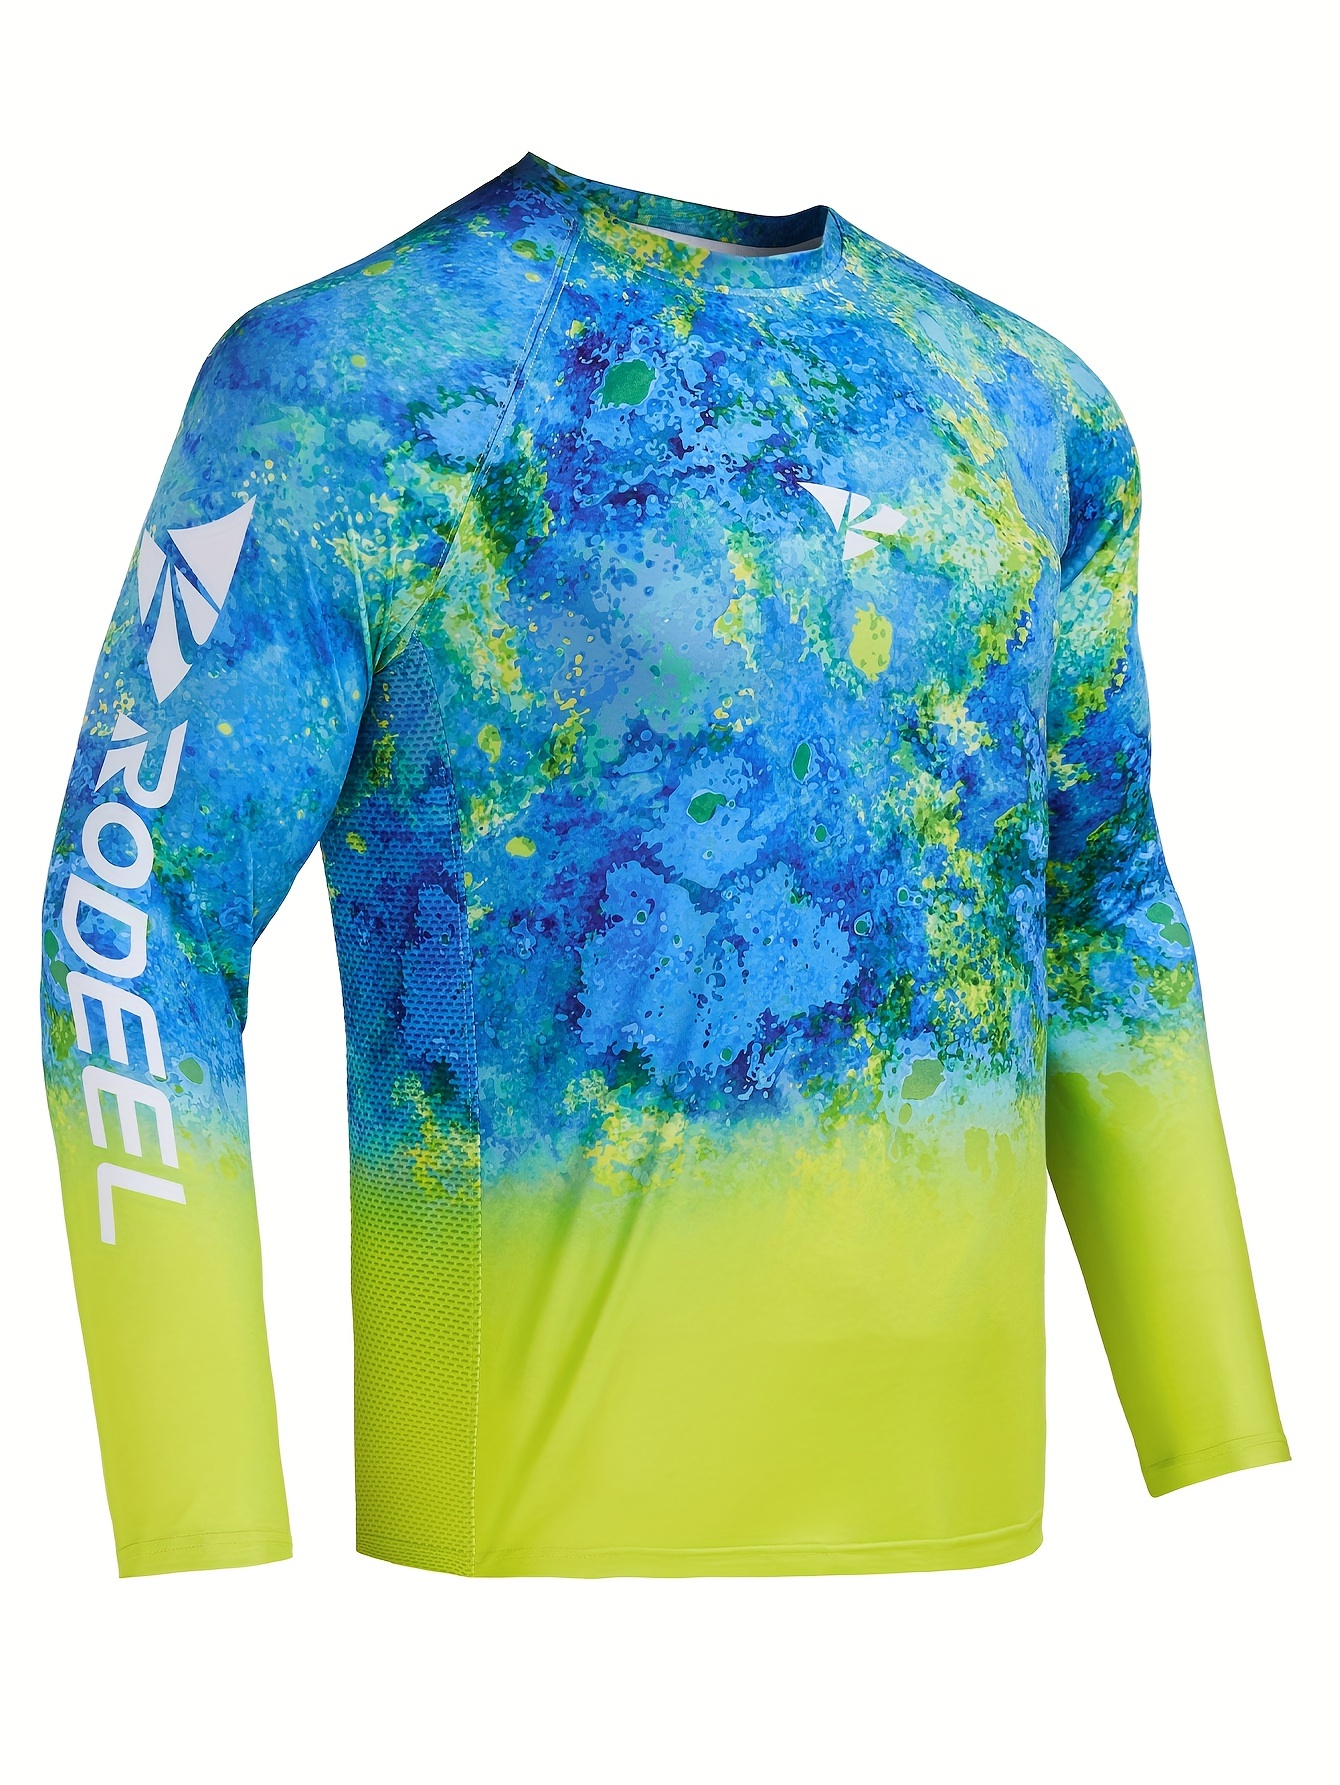 Men's UPF 50+ Sun Protection Camo Shirt: Quick Dry, Breathable, Moisture  Wicking Long Sleeves Rash Guard for Fishing, Hiking & Outdoor Activities